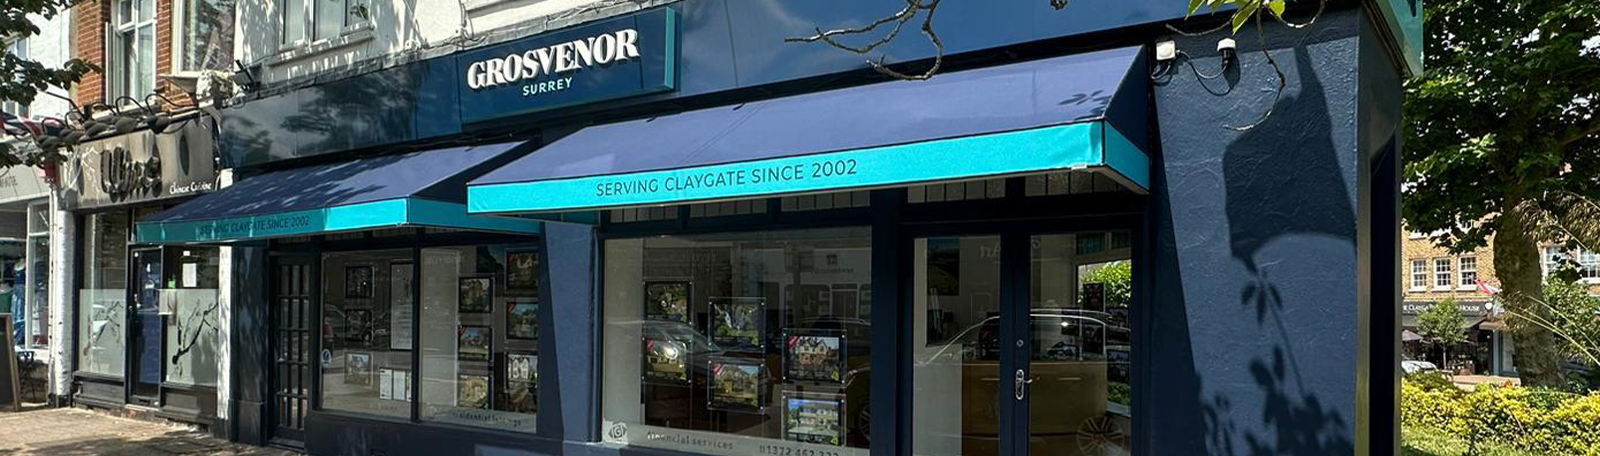 Offices Claygate Estate Banner Grosvenor